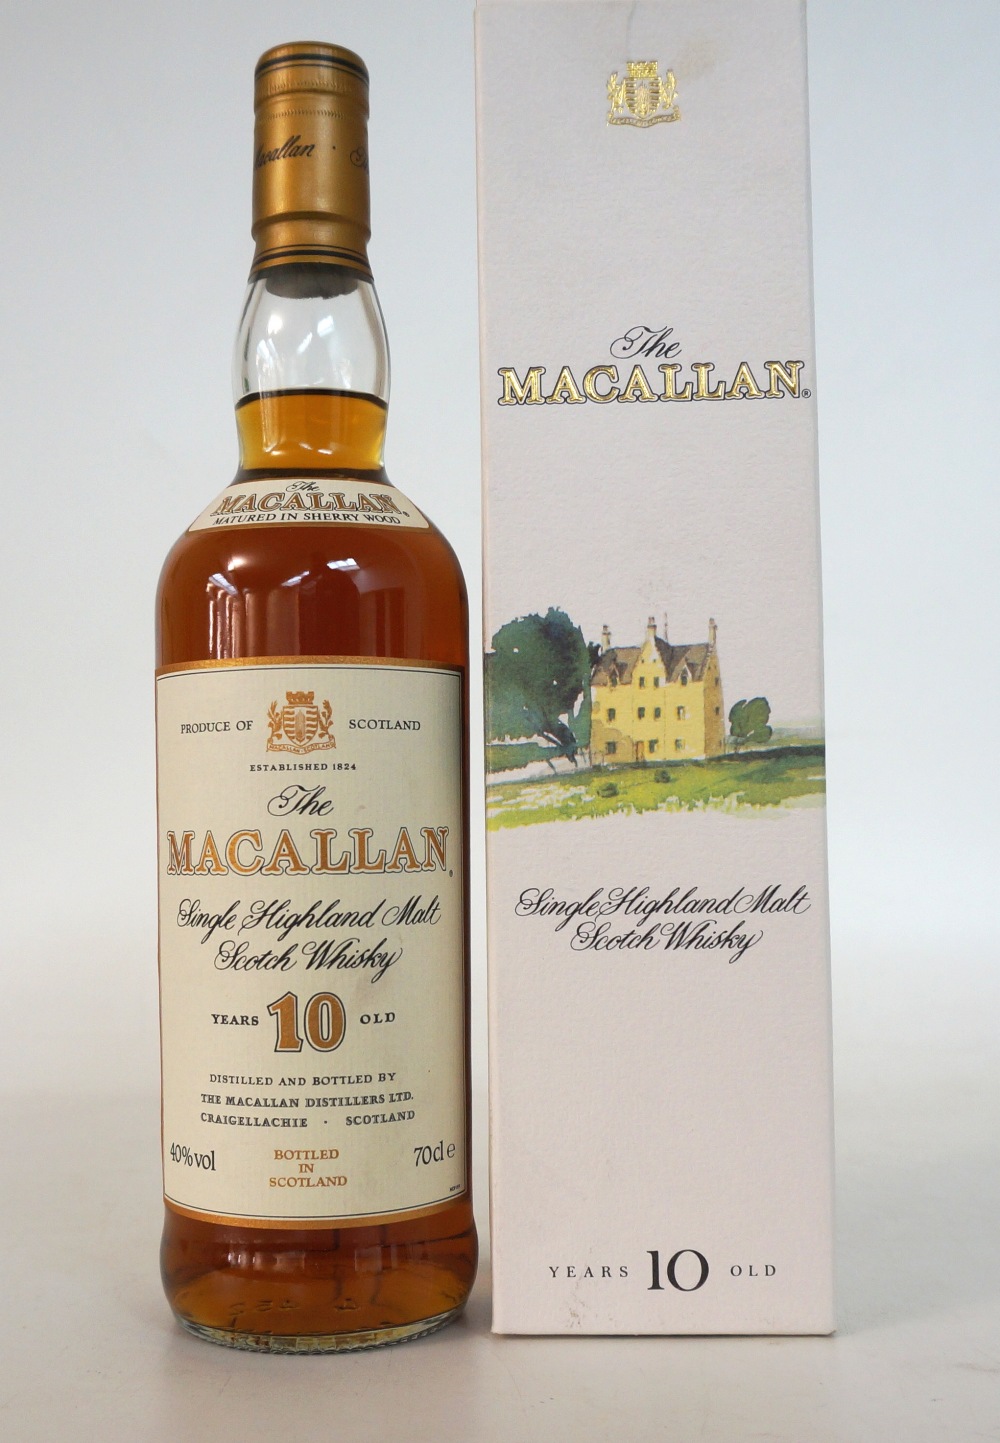 Macallan 10 Year Old An Older Style Bottling Of The Macallan 10 Year Old Single Malt Scotch Whisk